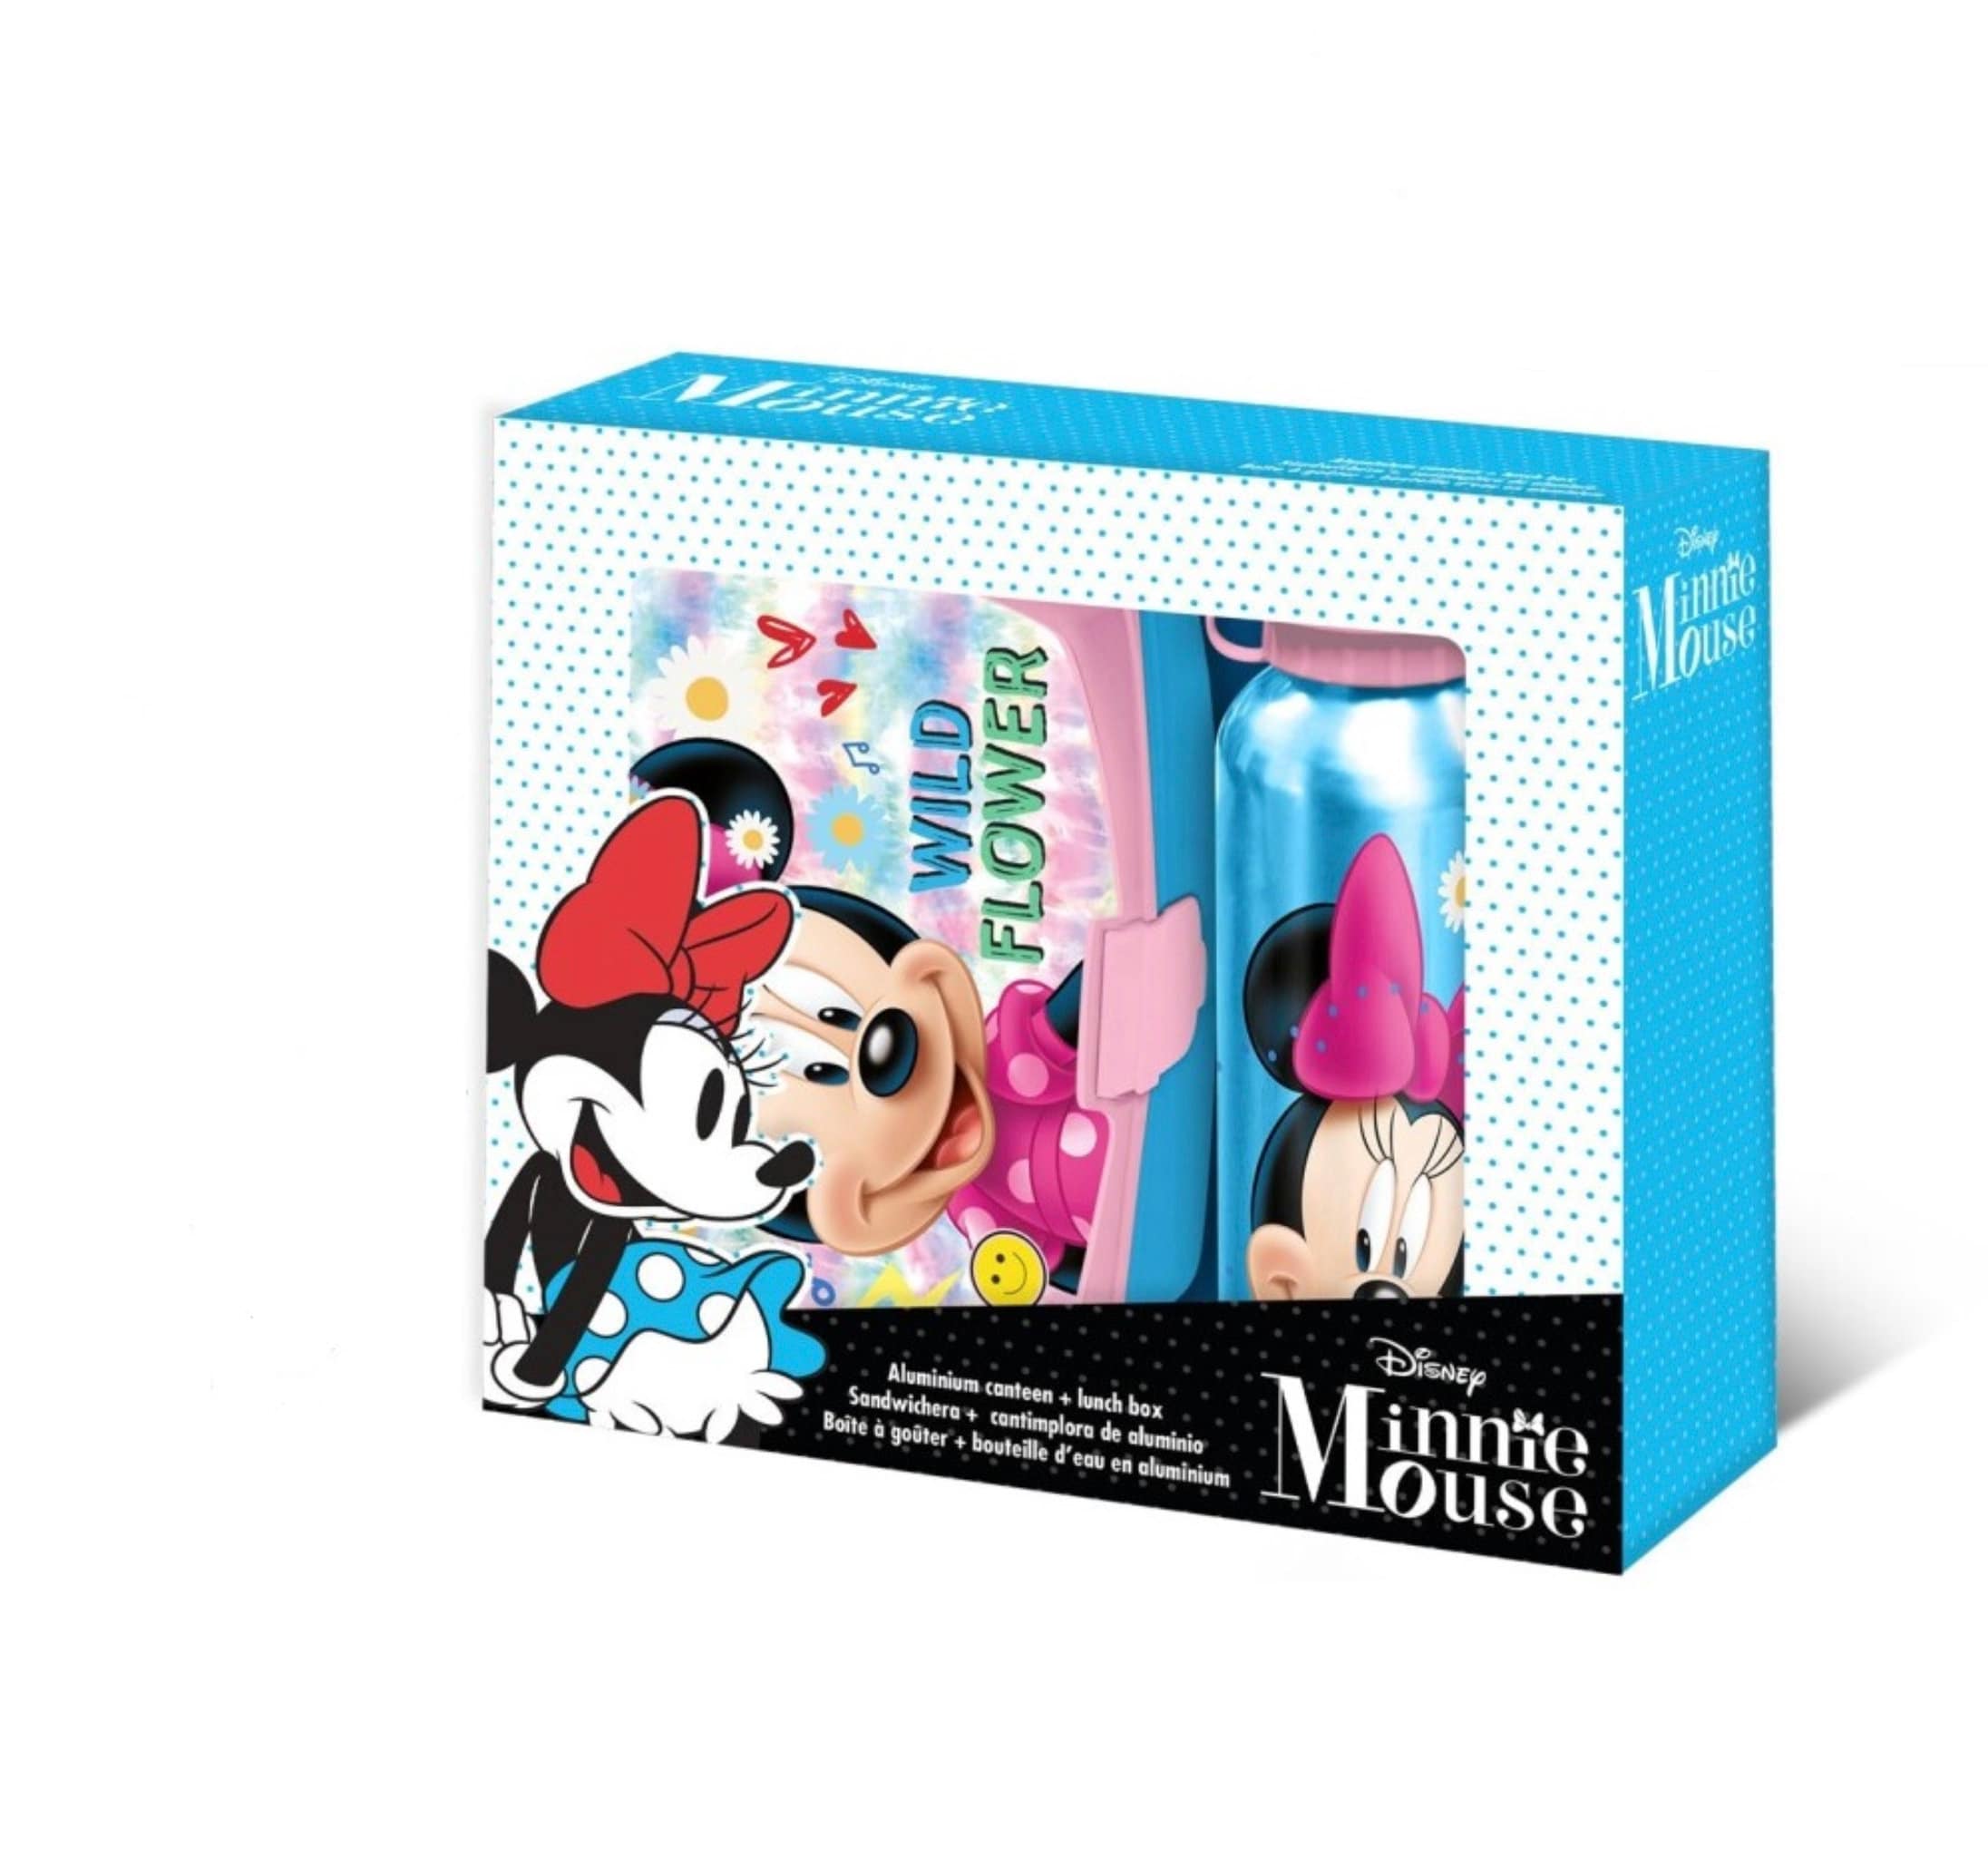 Disney Minnie Mouse Lunch Box and Water Bottle Set 2 Piece